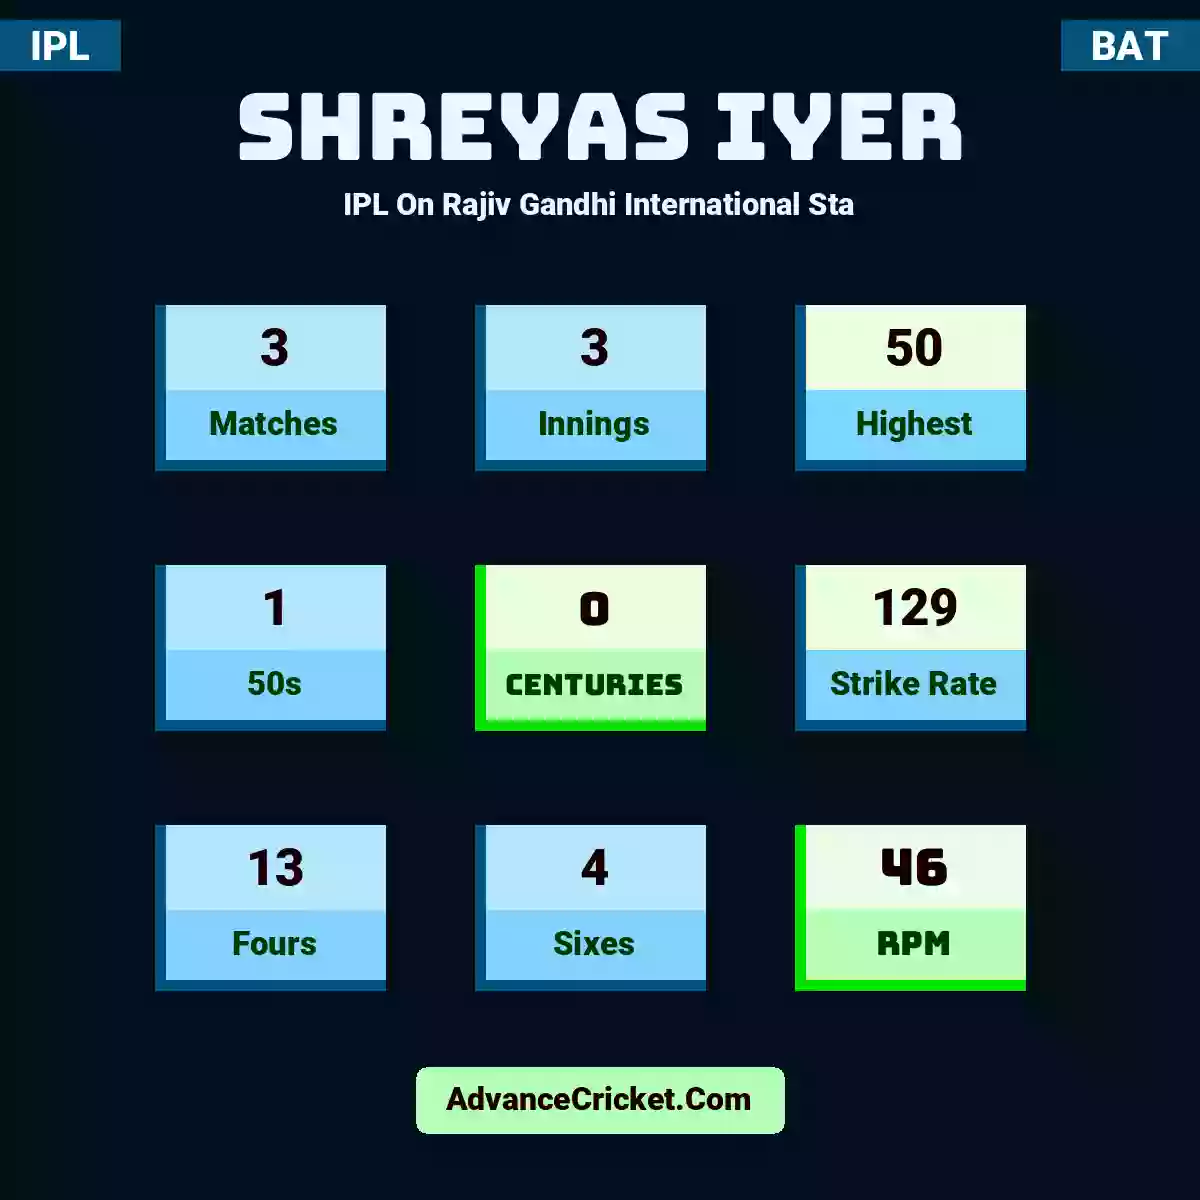 Shreyas Iyer IPL  On Rajiv Gandhi International Sta, Shreyas Iyer played 3 matches, scored 50 runs as highest, 1 half-centuries, and 0 centuries, with a strike rate of 129. S.Iyer hit 13 fours and 4 sixes, with an RPM of 46.